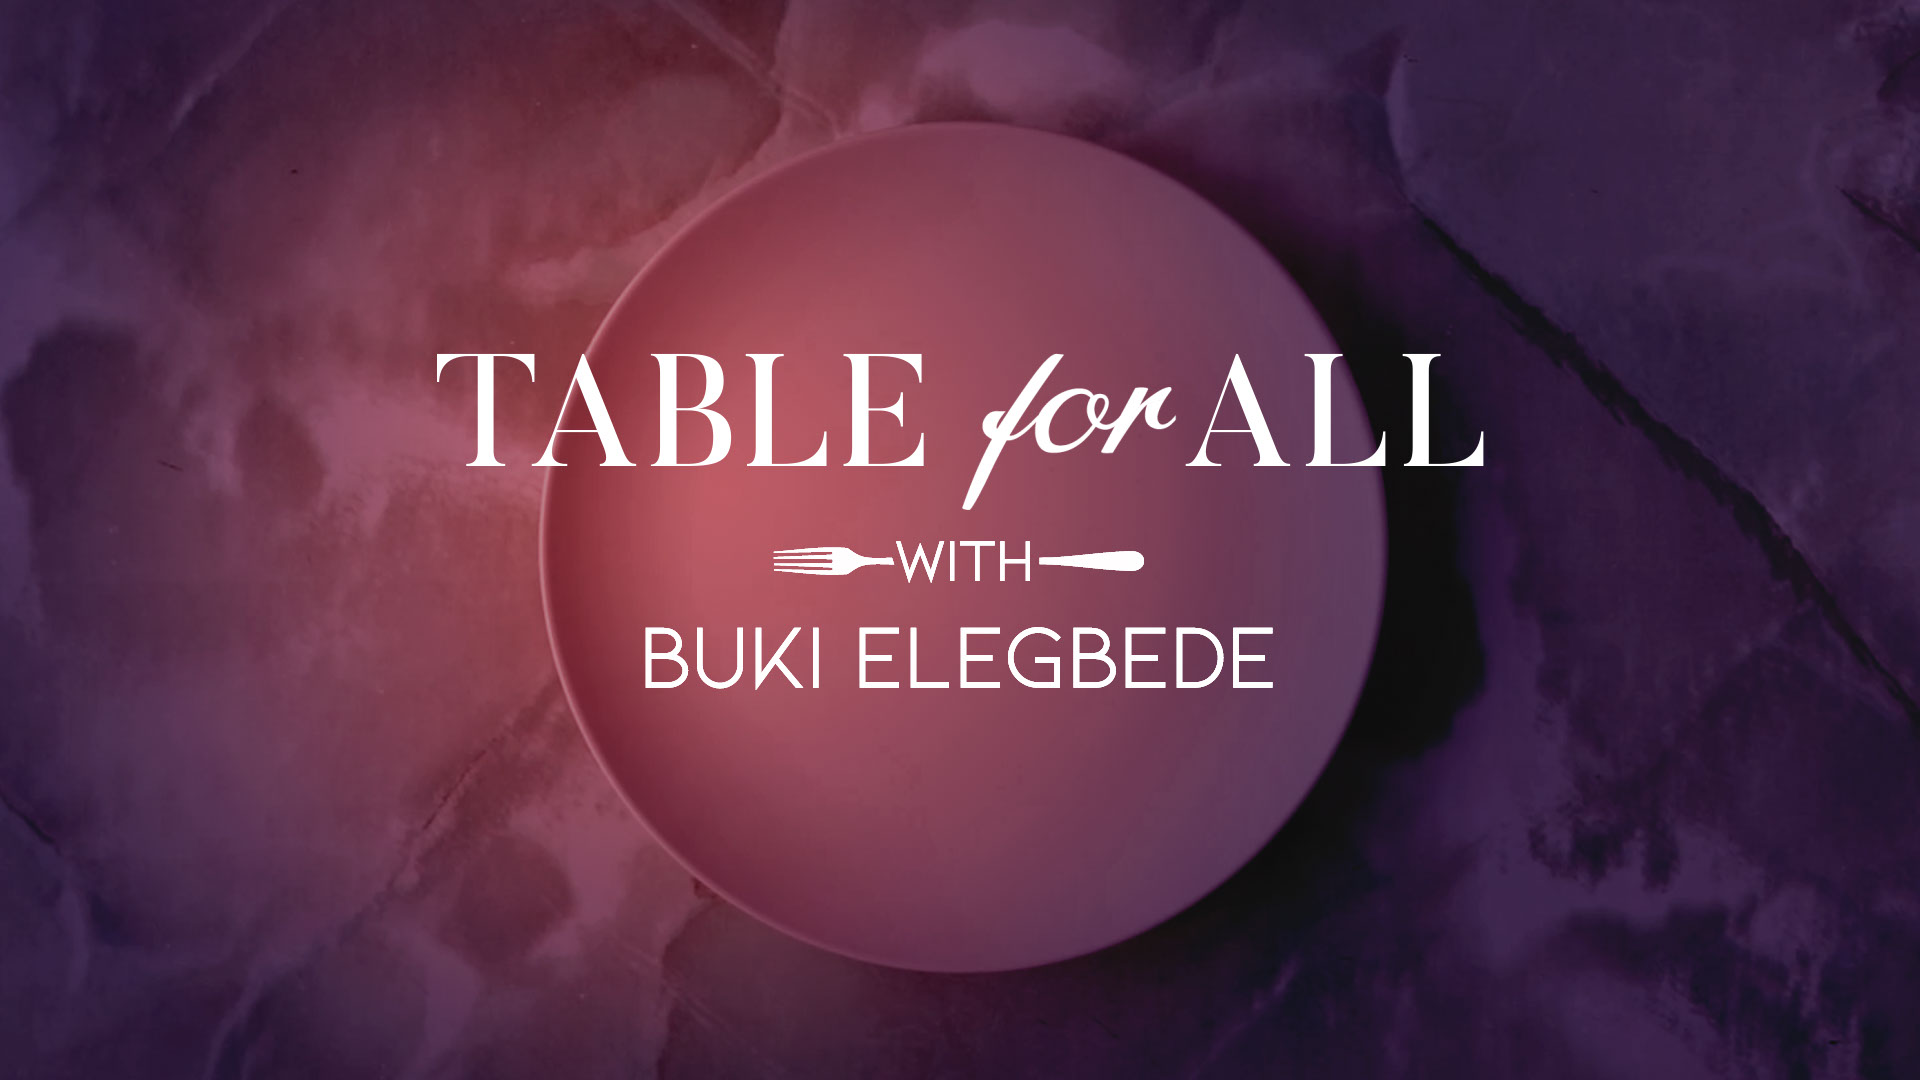 Check out Table For All With Buki Elegbede airing on a public television station near you!